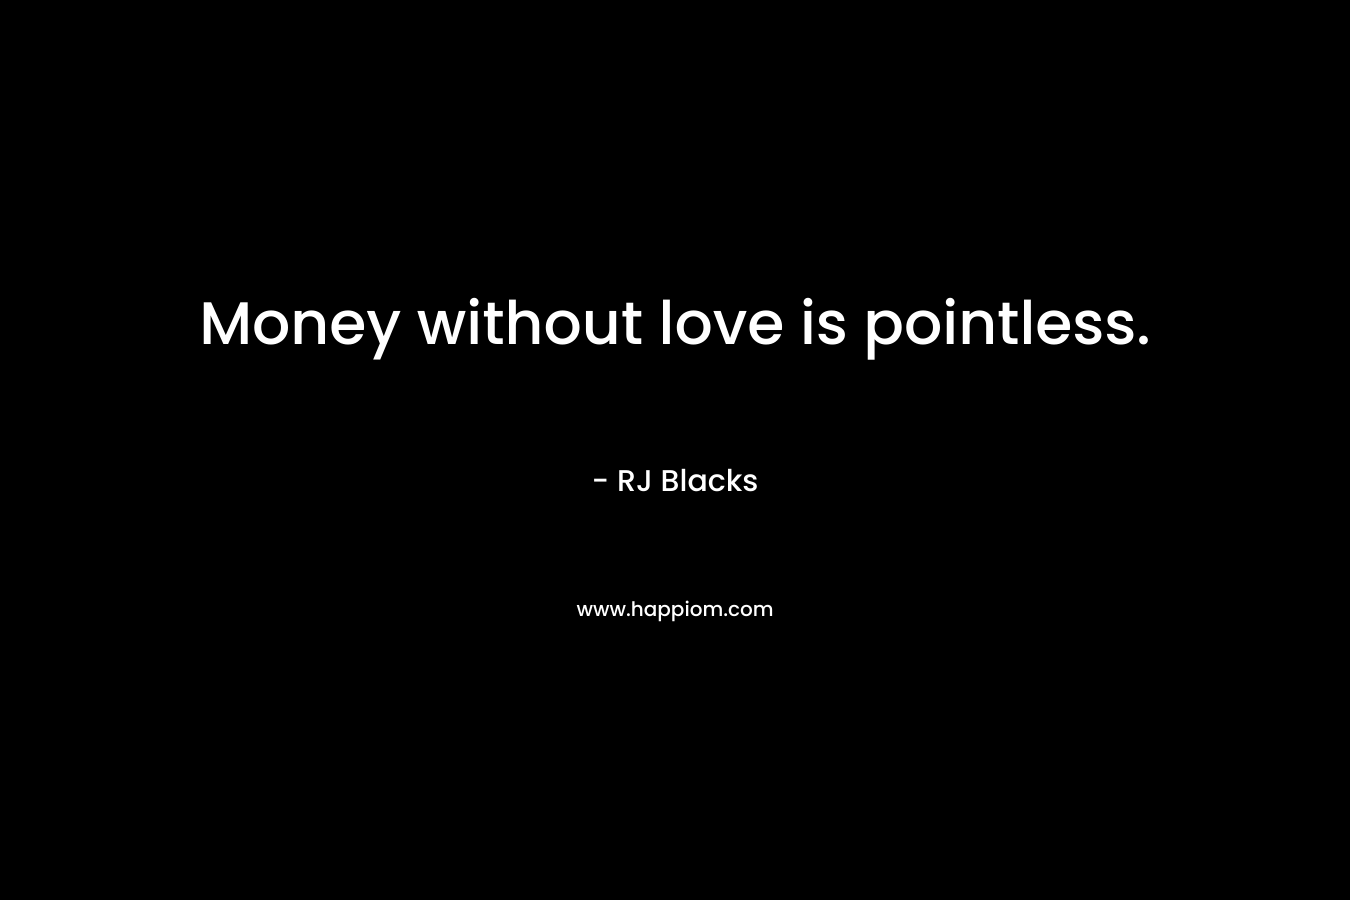 Money without love is pointless. – RJ Blacks